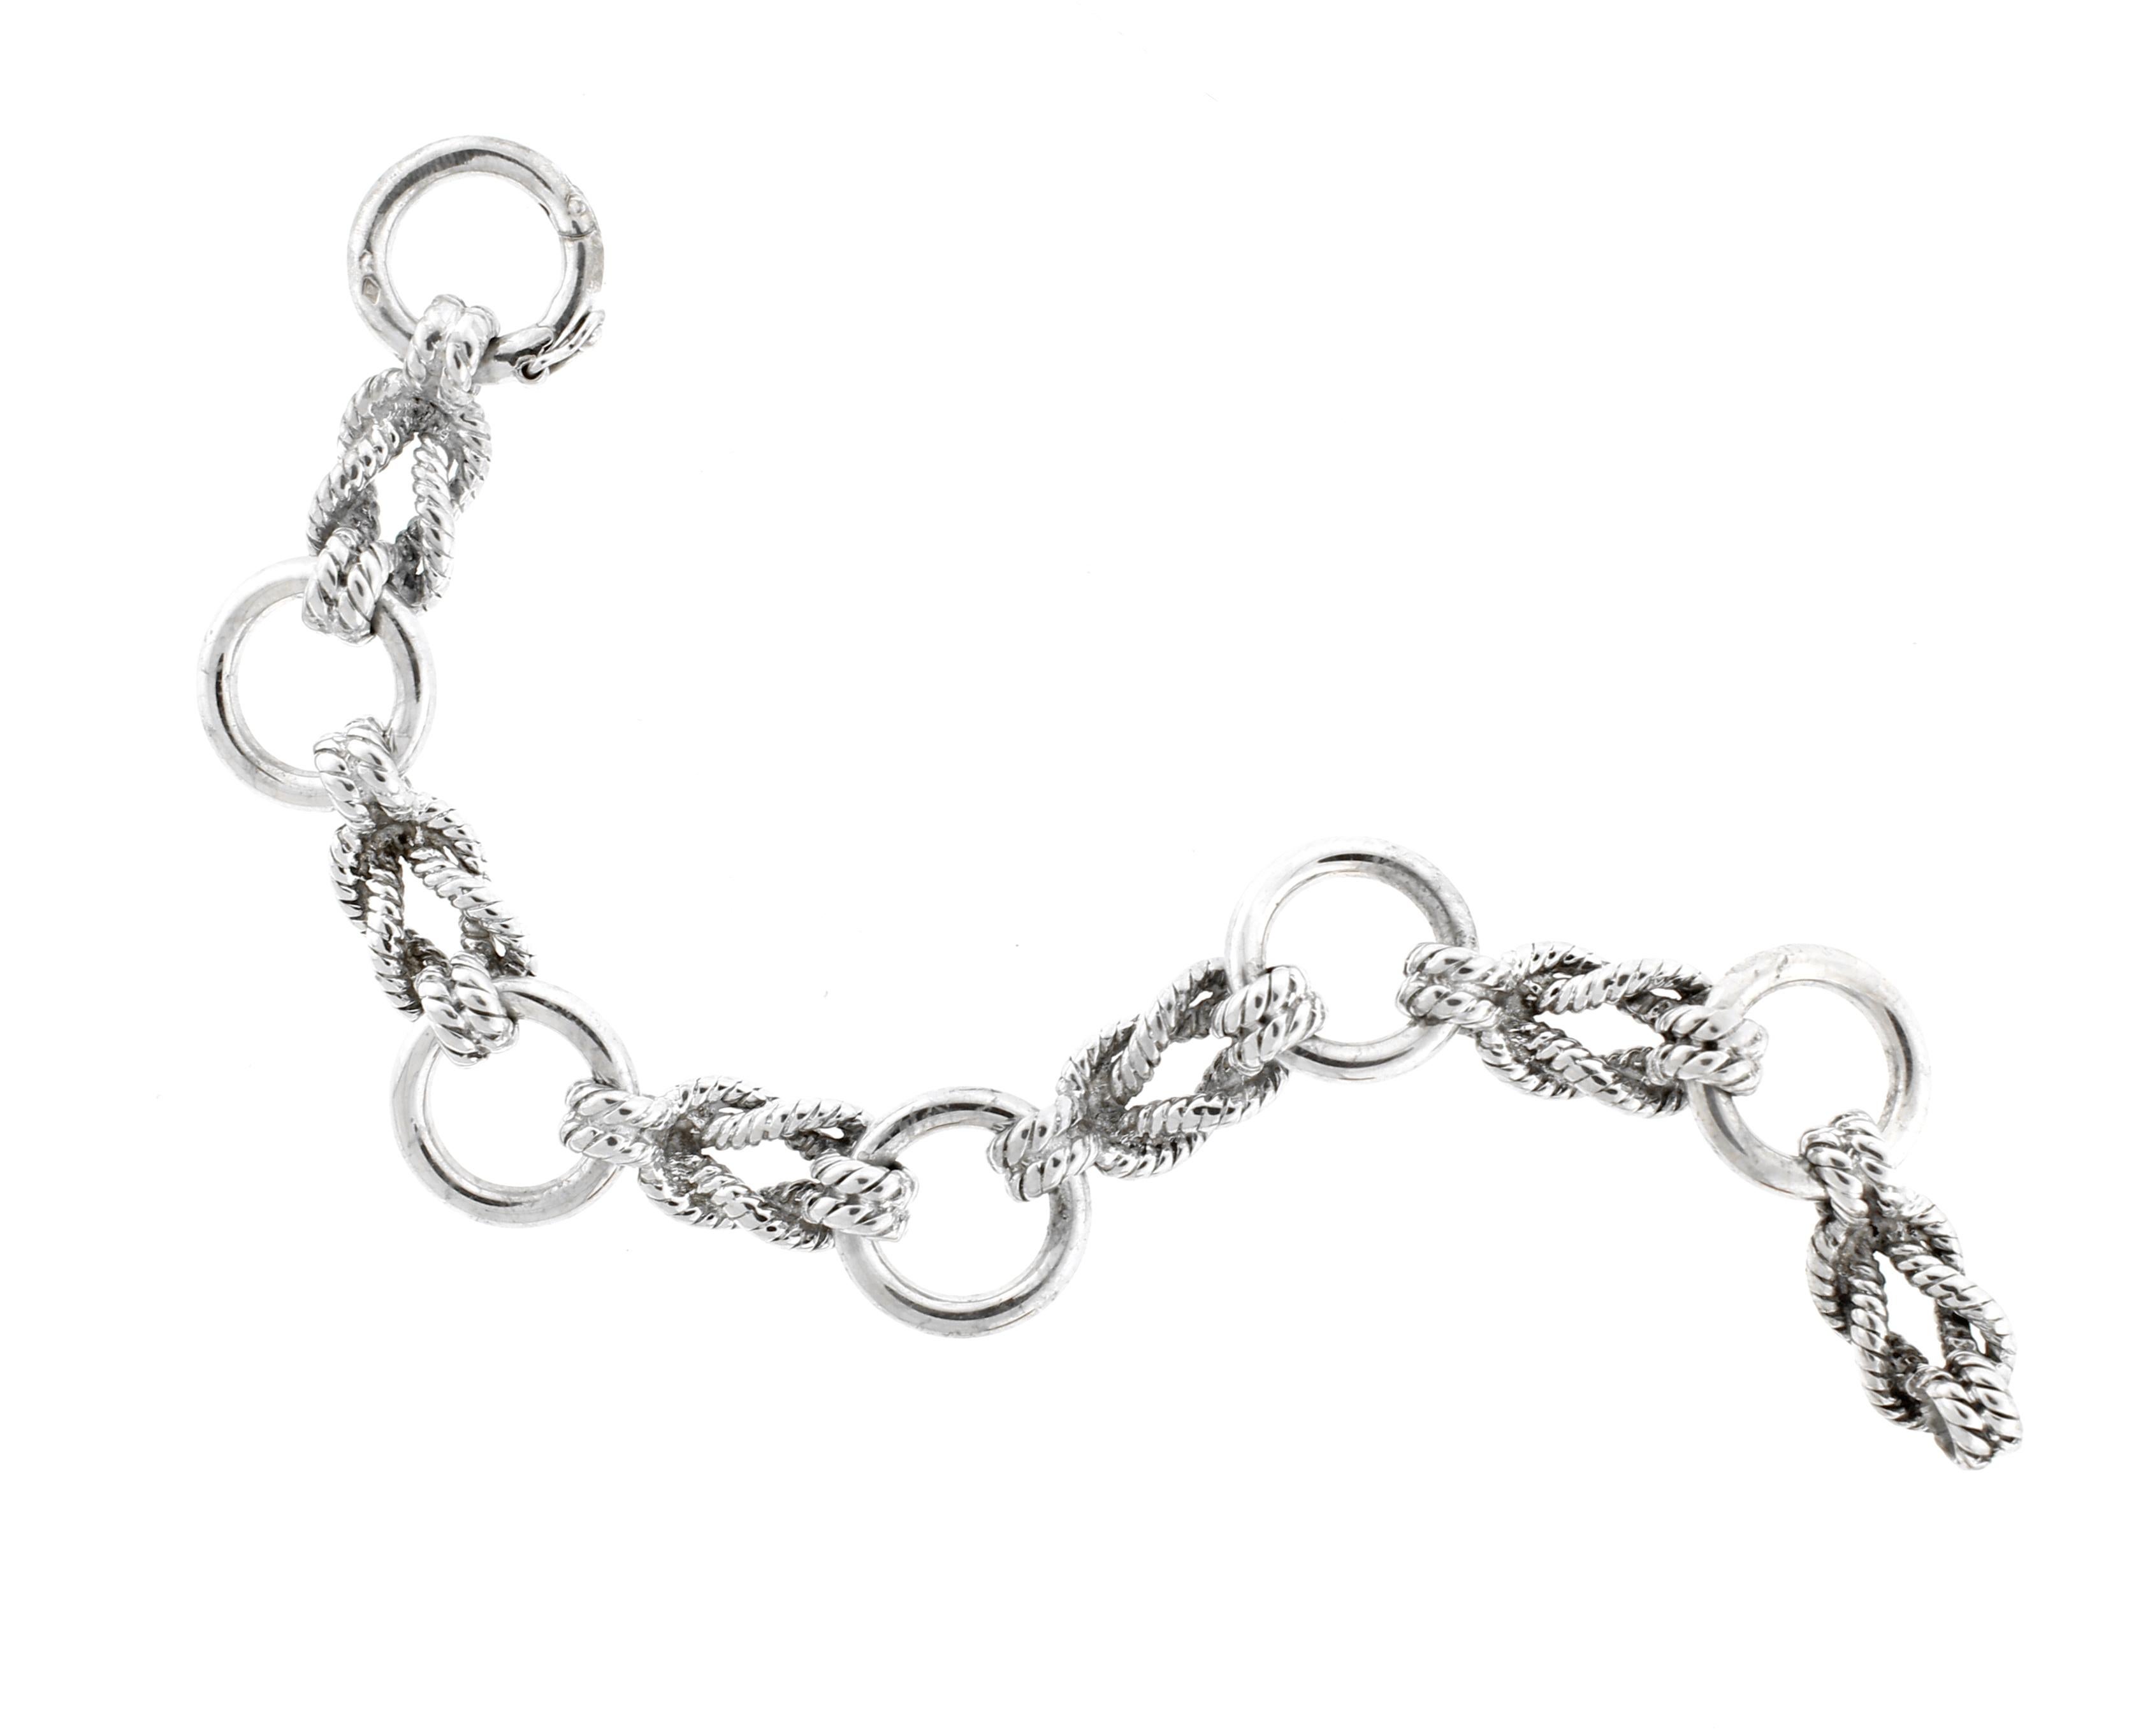 Silver Bracelet in the sailor's knot design by Hermes. The silver rope links are spaced with silver rings and shaped so that it fits the wrist. 7½ inches